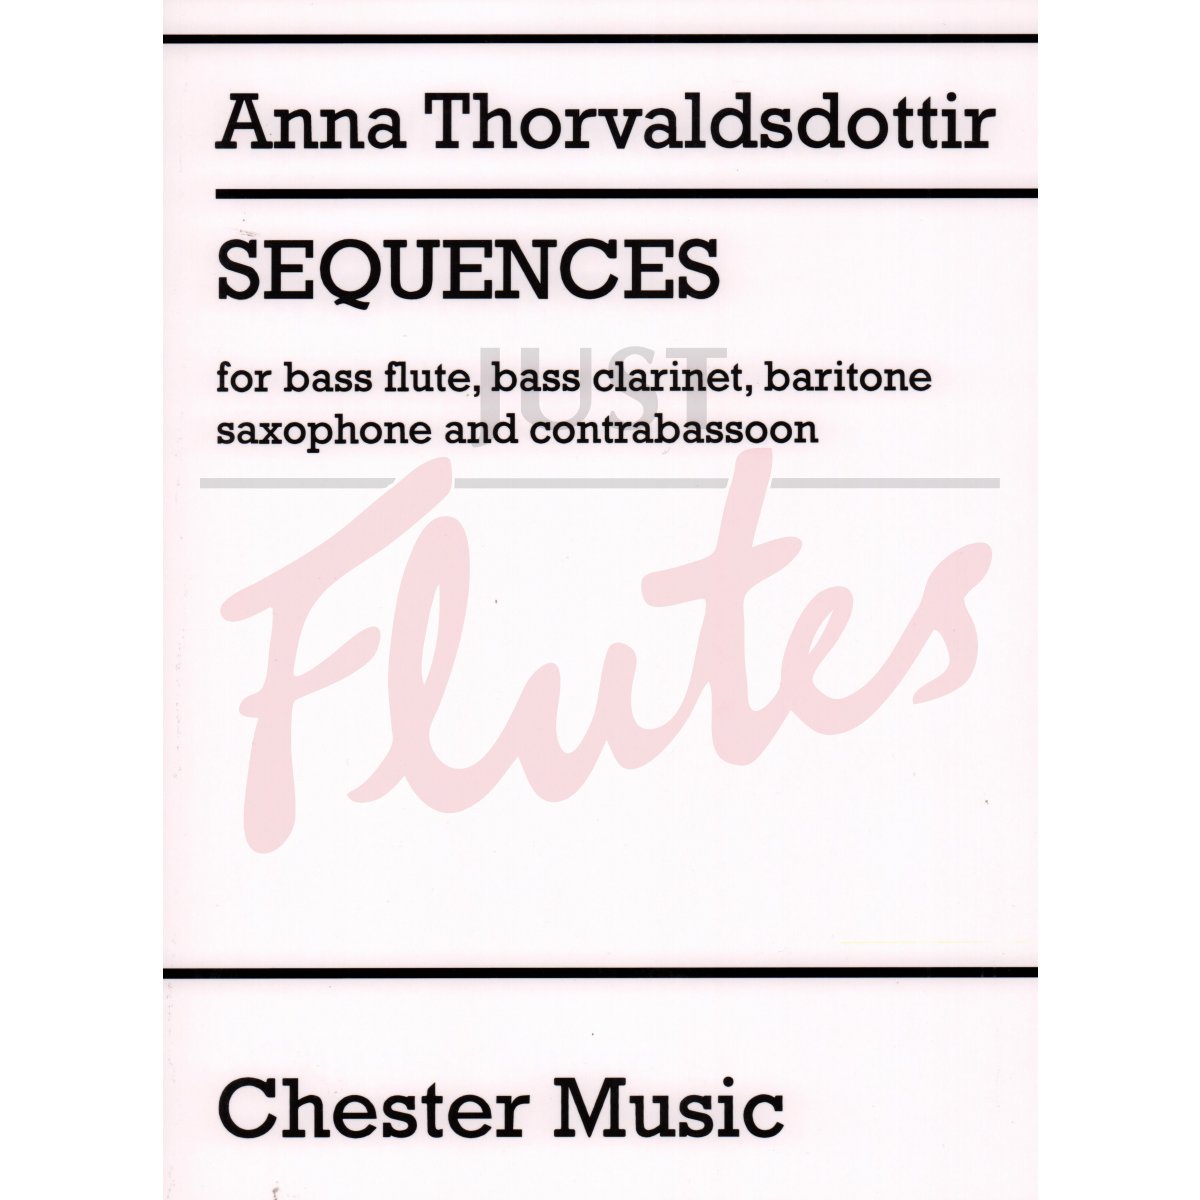 Sequences for Bass Flute, Bass Clarinet, Baritone Sax and Contrabassoon